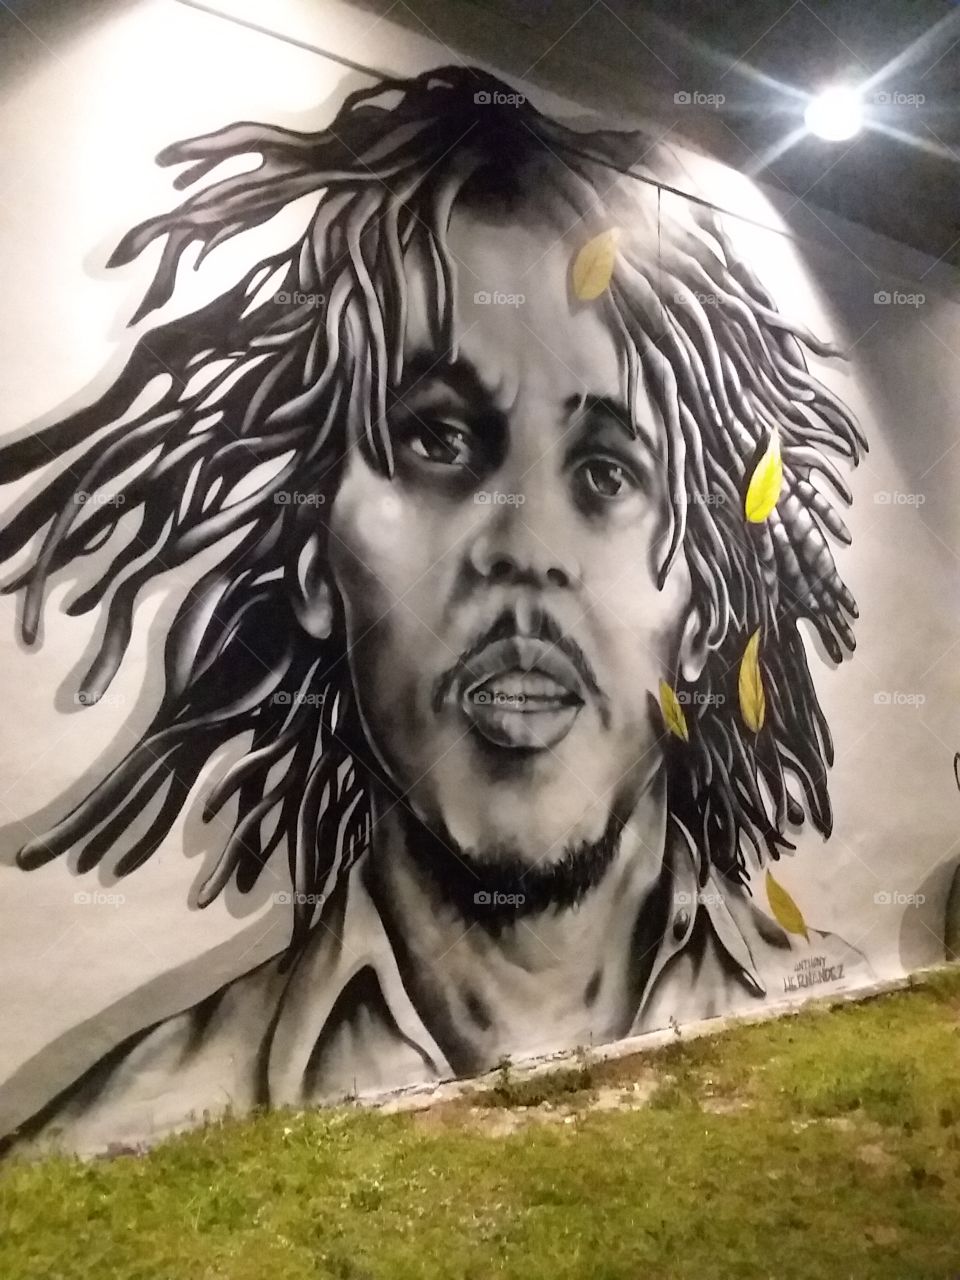 Bob Marley portrait I came across while exploring downtown West palm beach in Flordia! The artist did an incredible job !